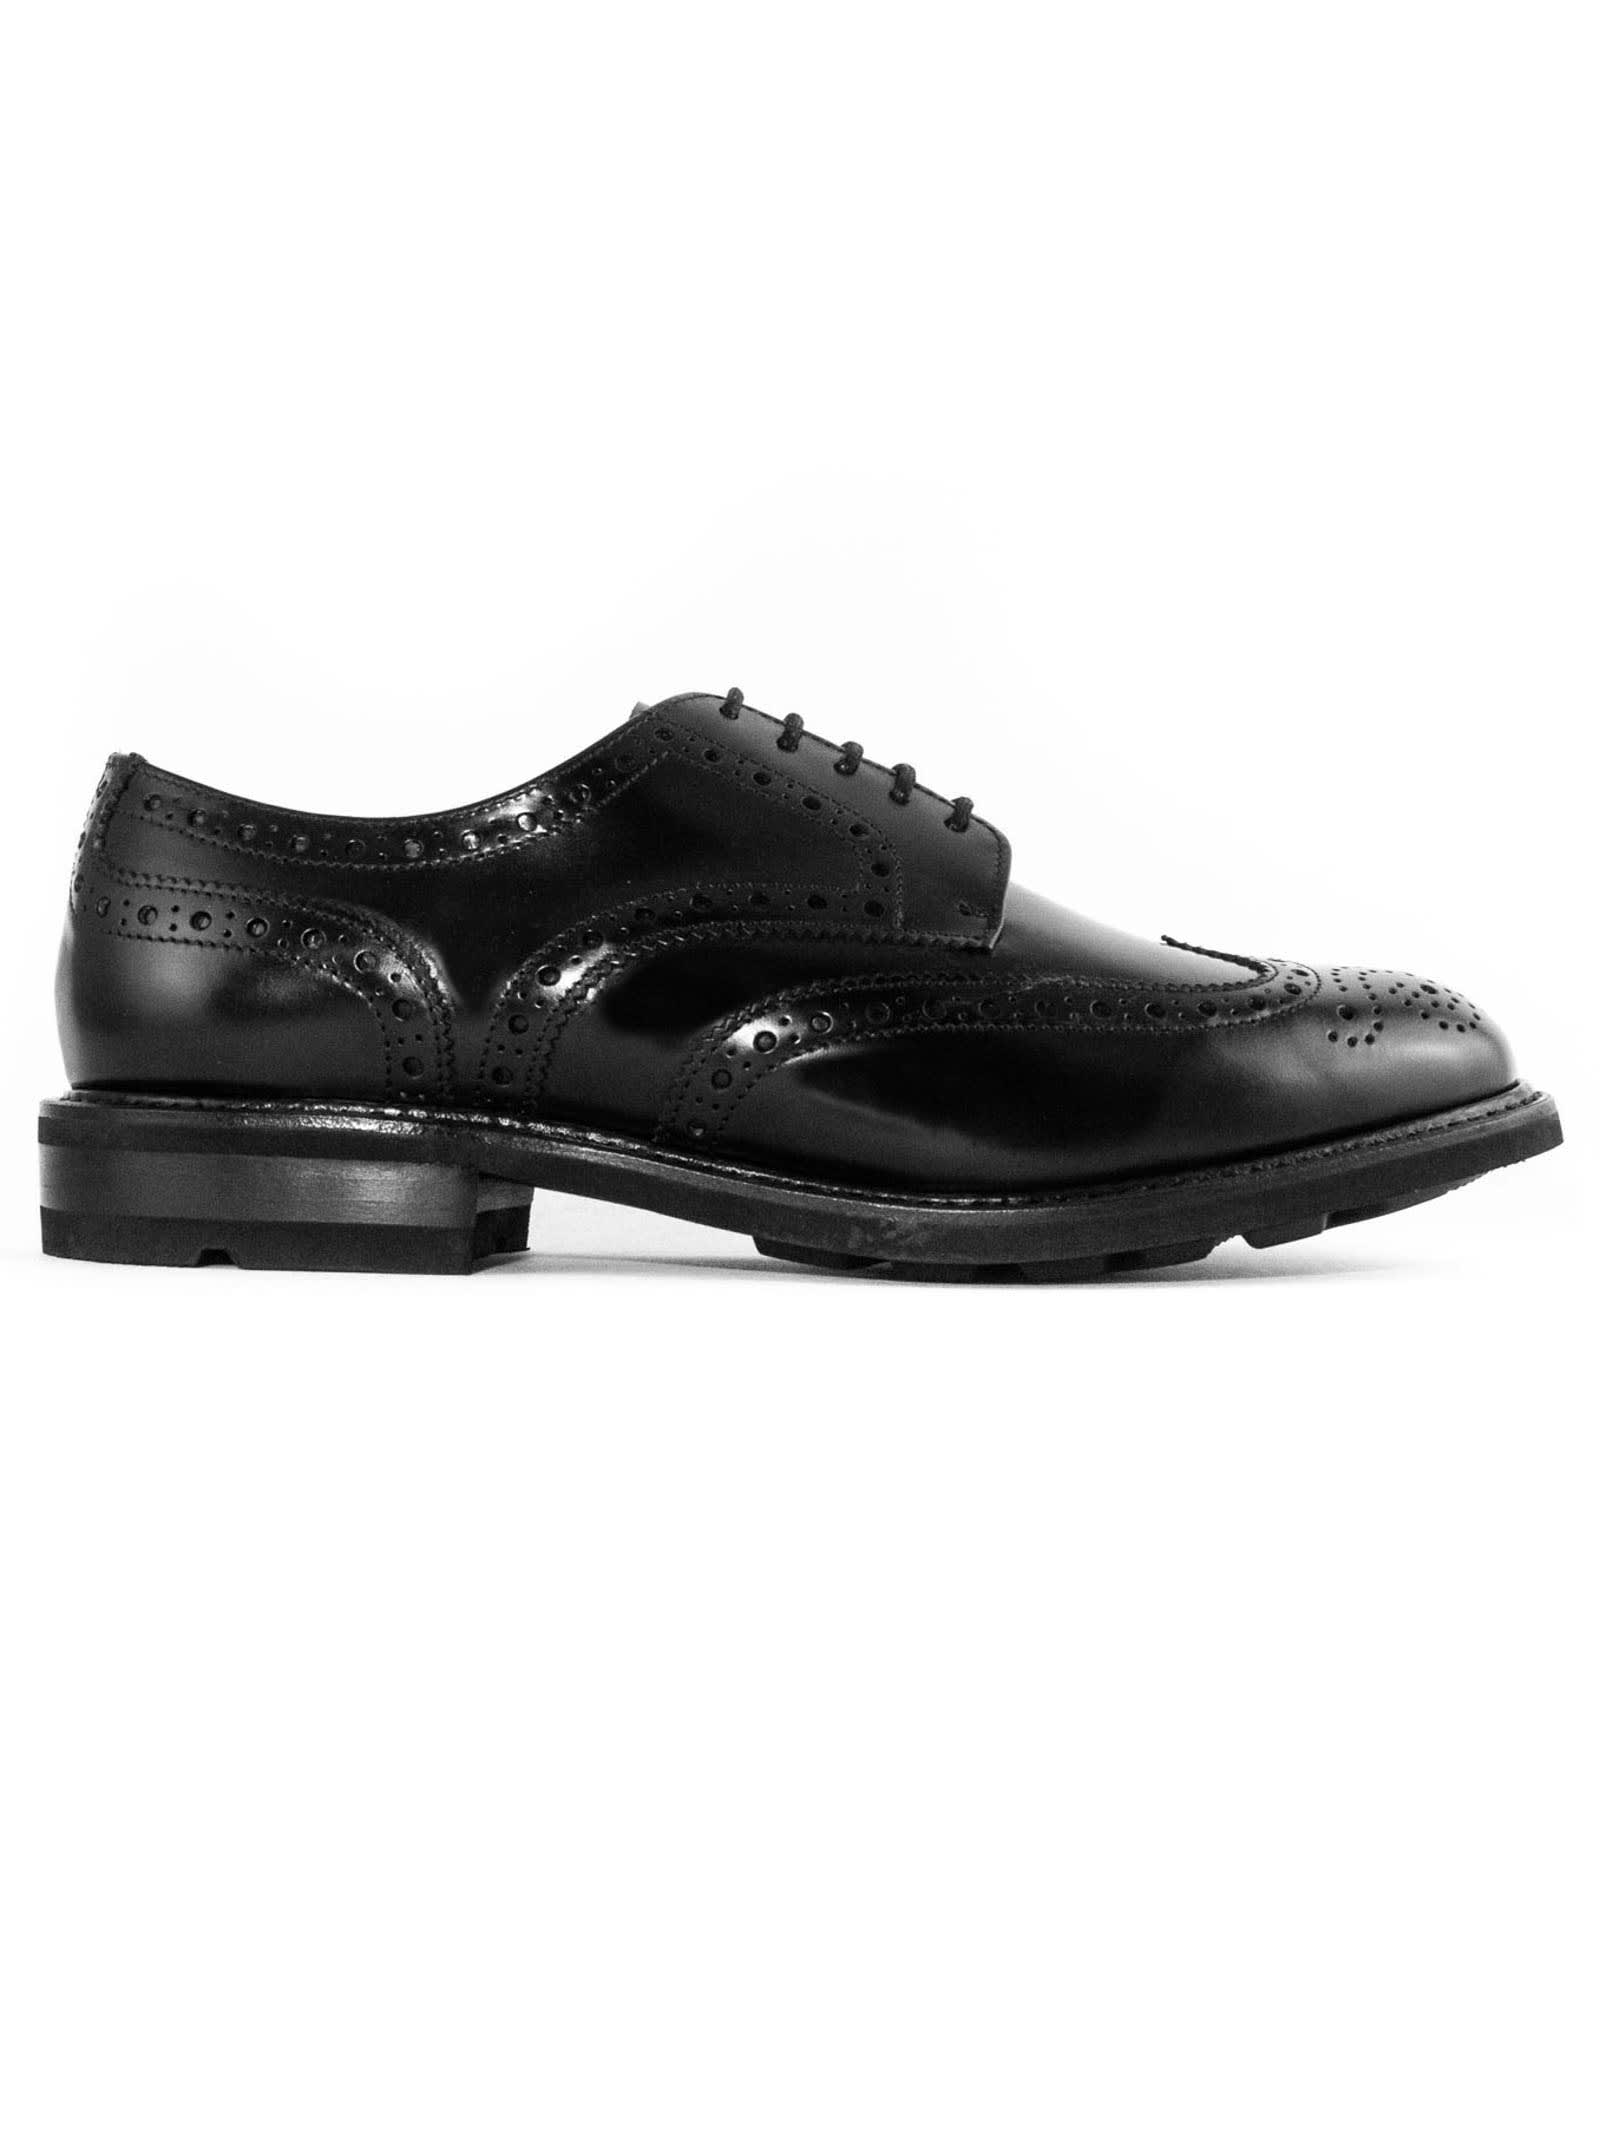 1707 Black Shiny Leather Derby Shoes